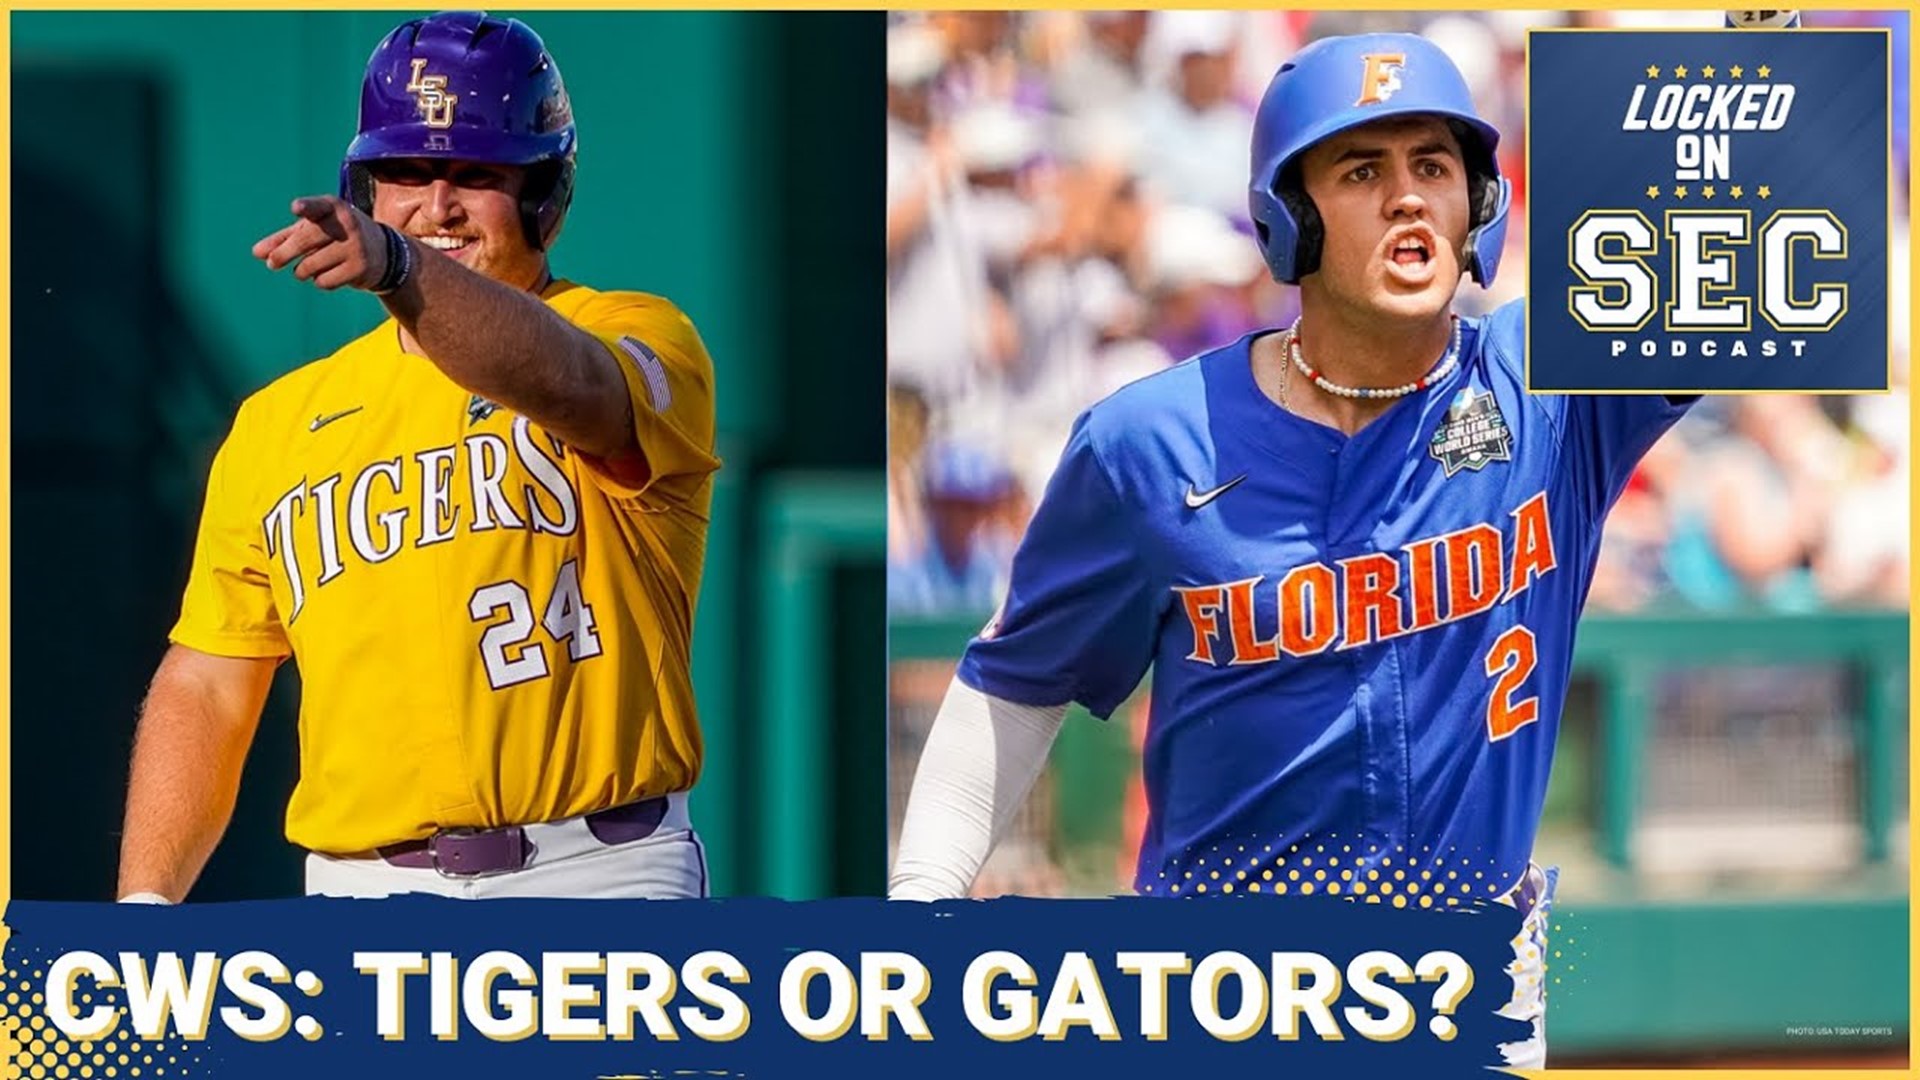 The SEC will crown a National Champion tonight out in Omaha – will it be LSU or Florida? We’ll recap the weekend that was in the College World Series as LSU won an i